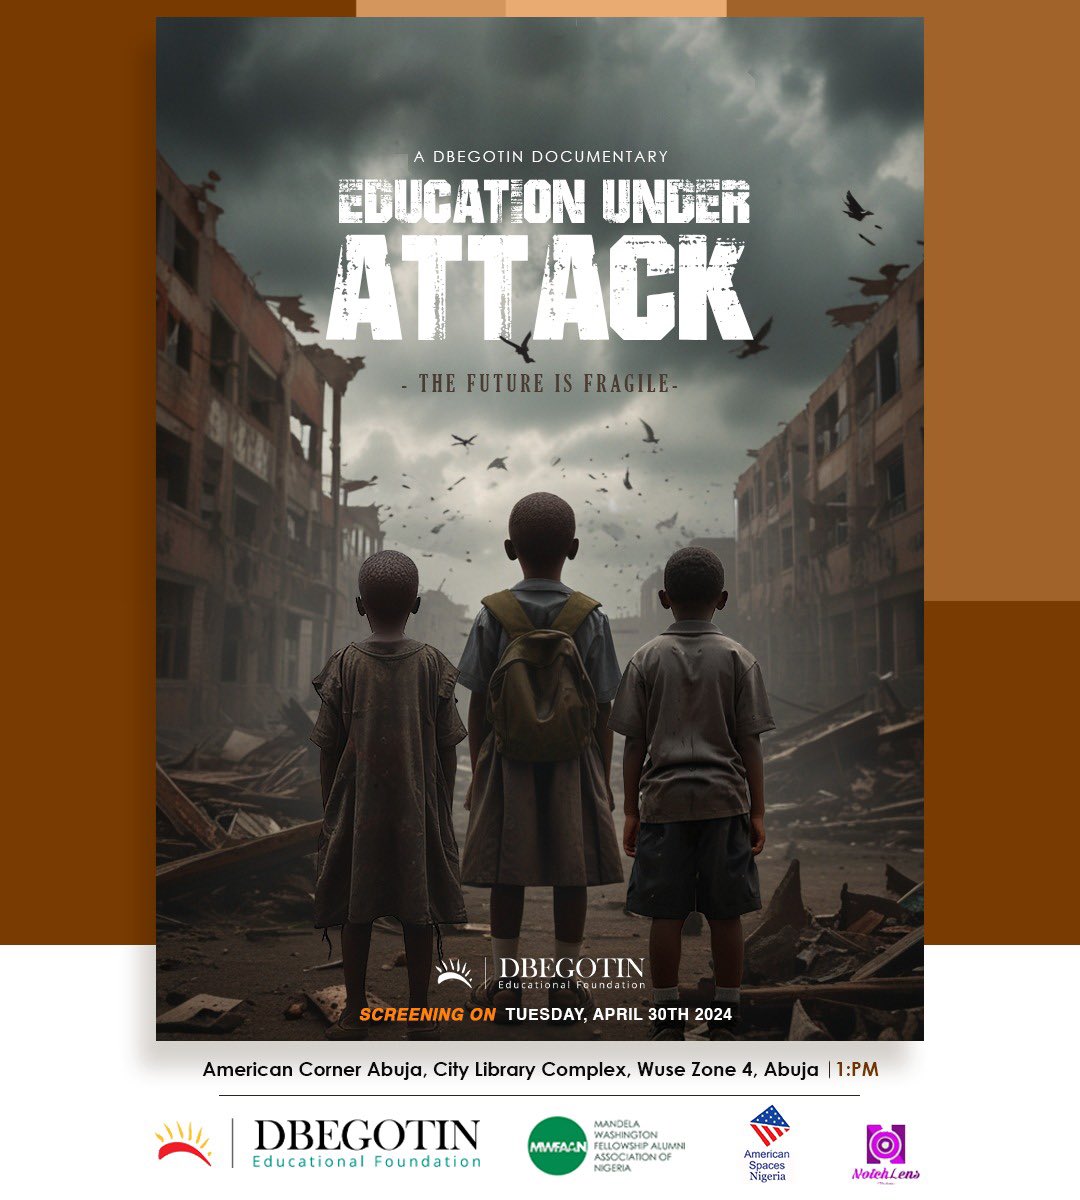 Dear Fellows

You're invited to the premiere screening of Dbegotin Foundation documentary 'Education Under Attack'

*Date: Tuesday, April 30th, 2024
*Time: 1 PM
*Venue: American Corner Abuja, City Library Complex, Wuse Zone 4.